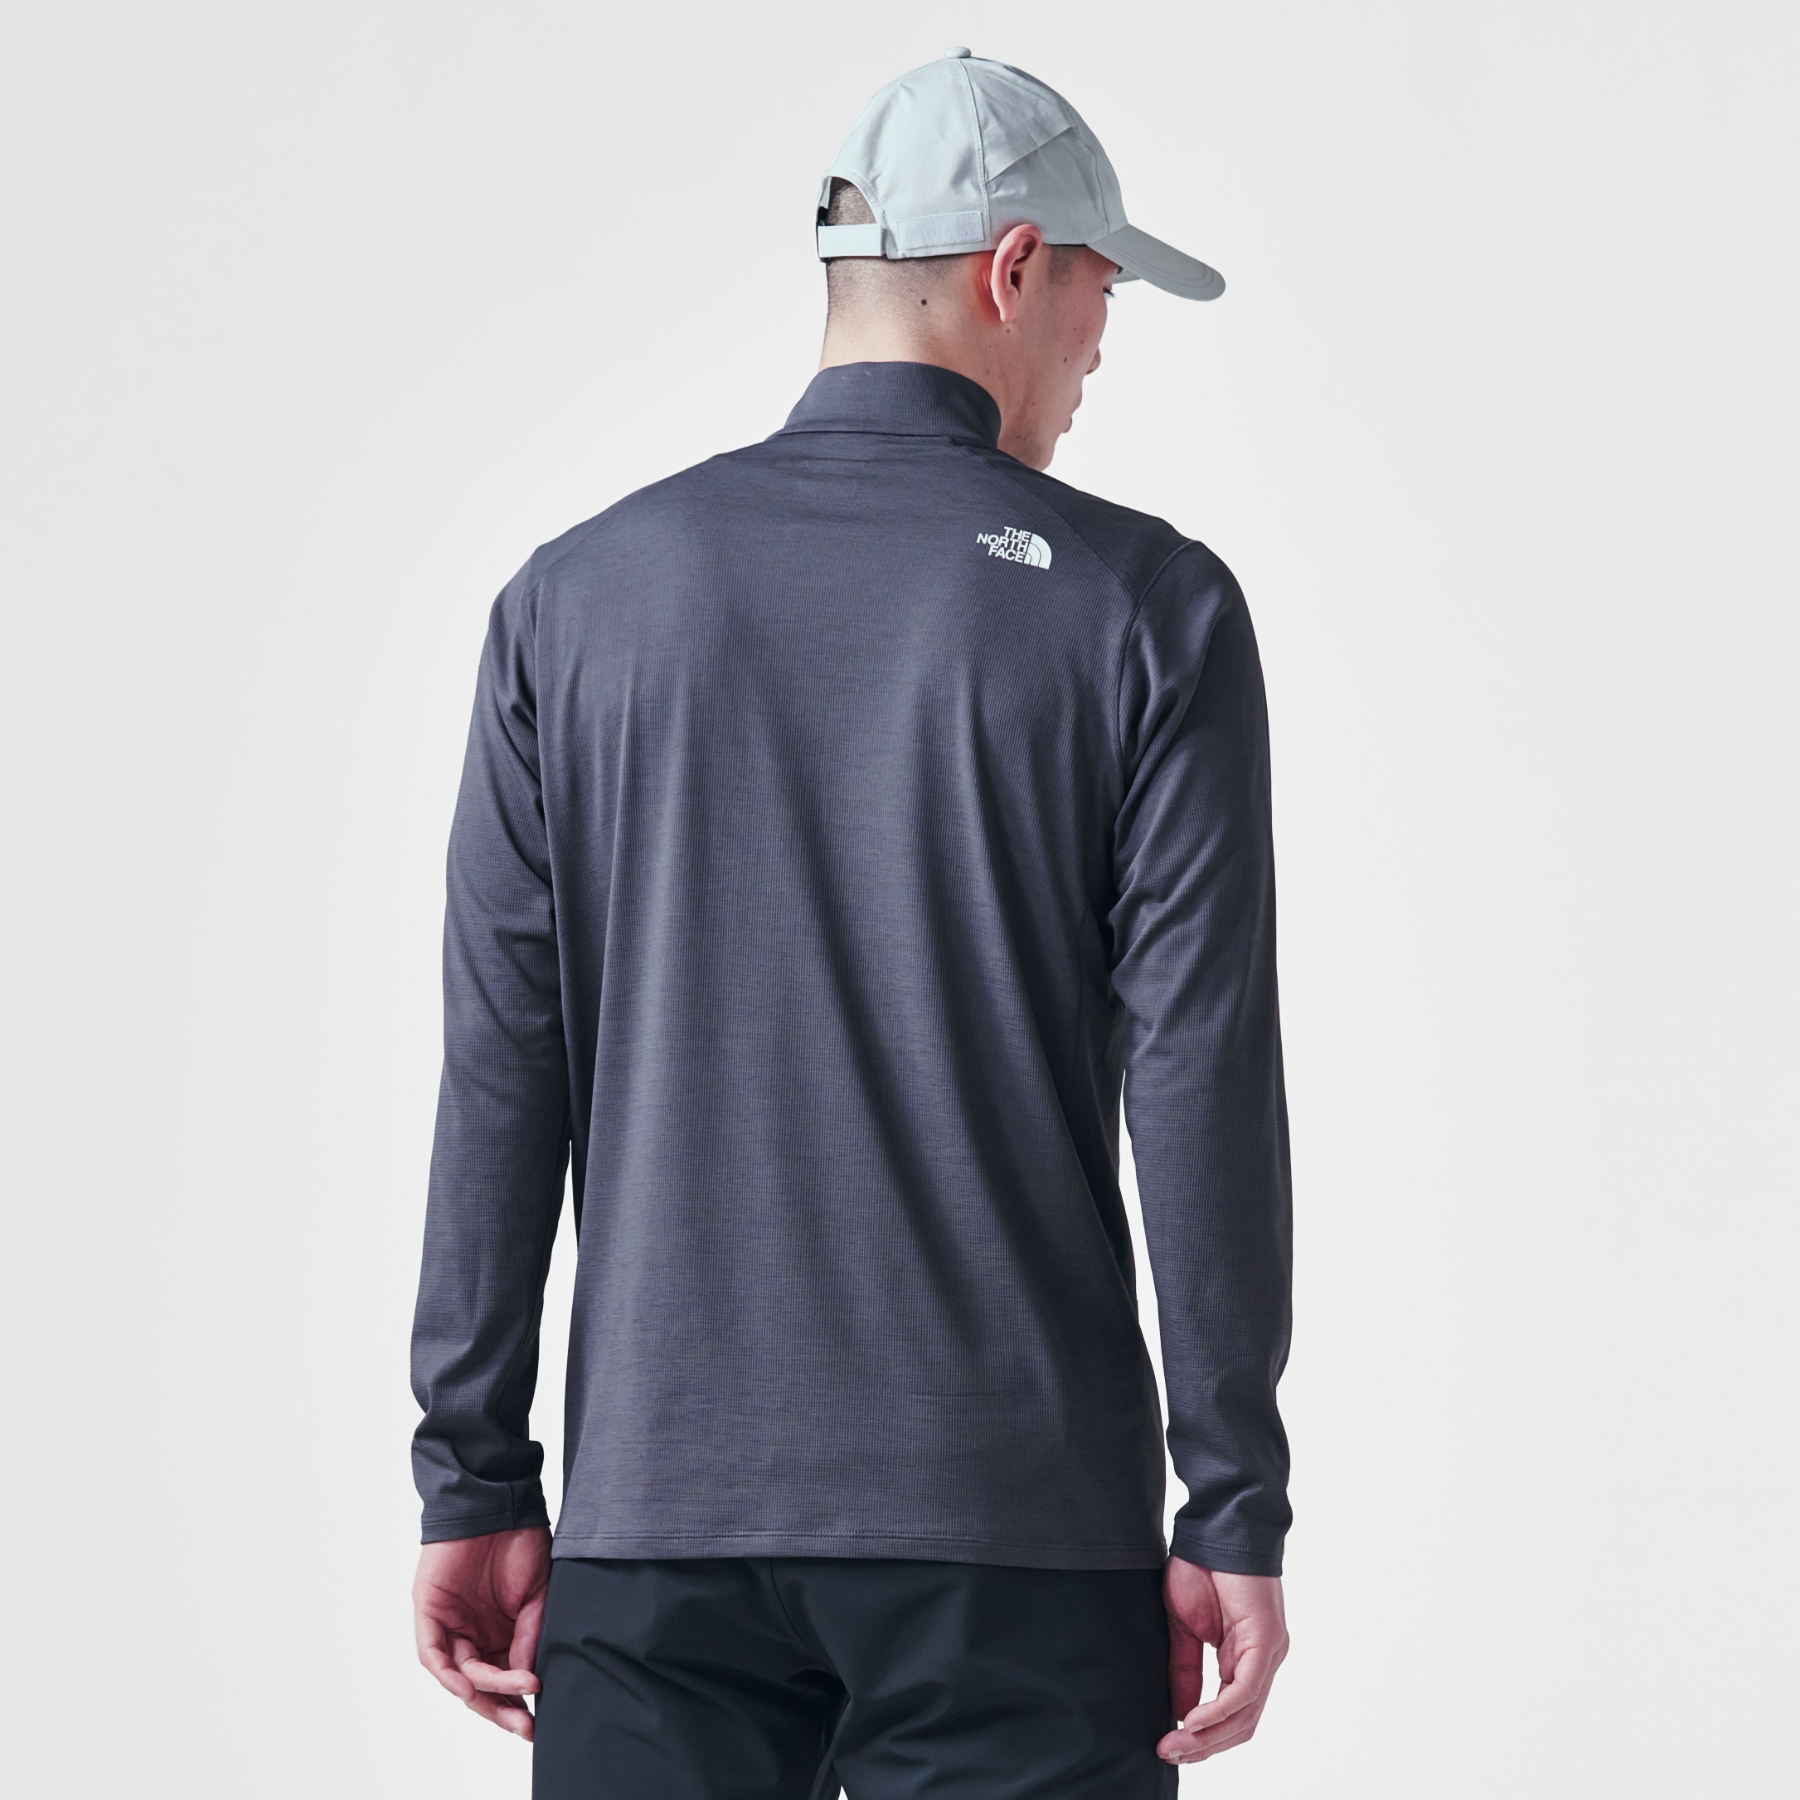 L/S FLASHDRY 3D ZIP UP(NT12201) - THE NORTH FACE MOUNTAIN